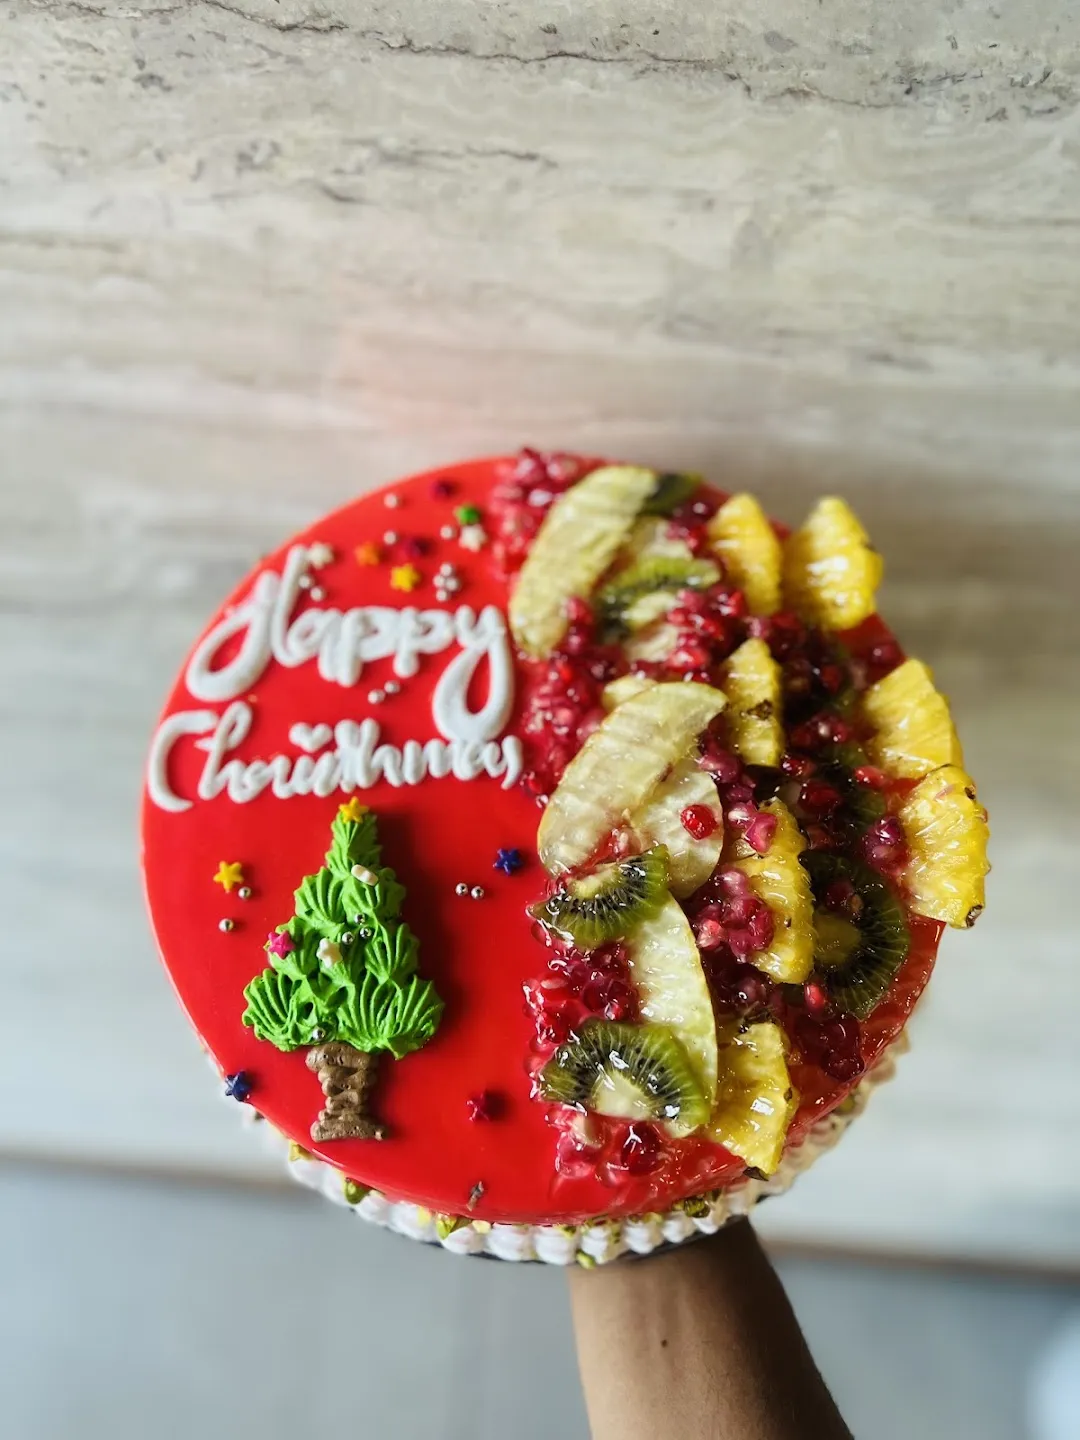 Catalogue - Spunge Cakes and Cafe in Tirur, Malappuram - Justdial